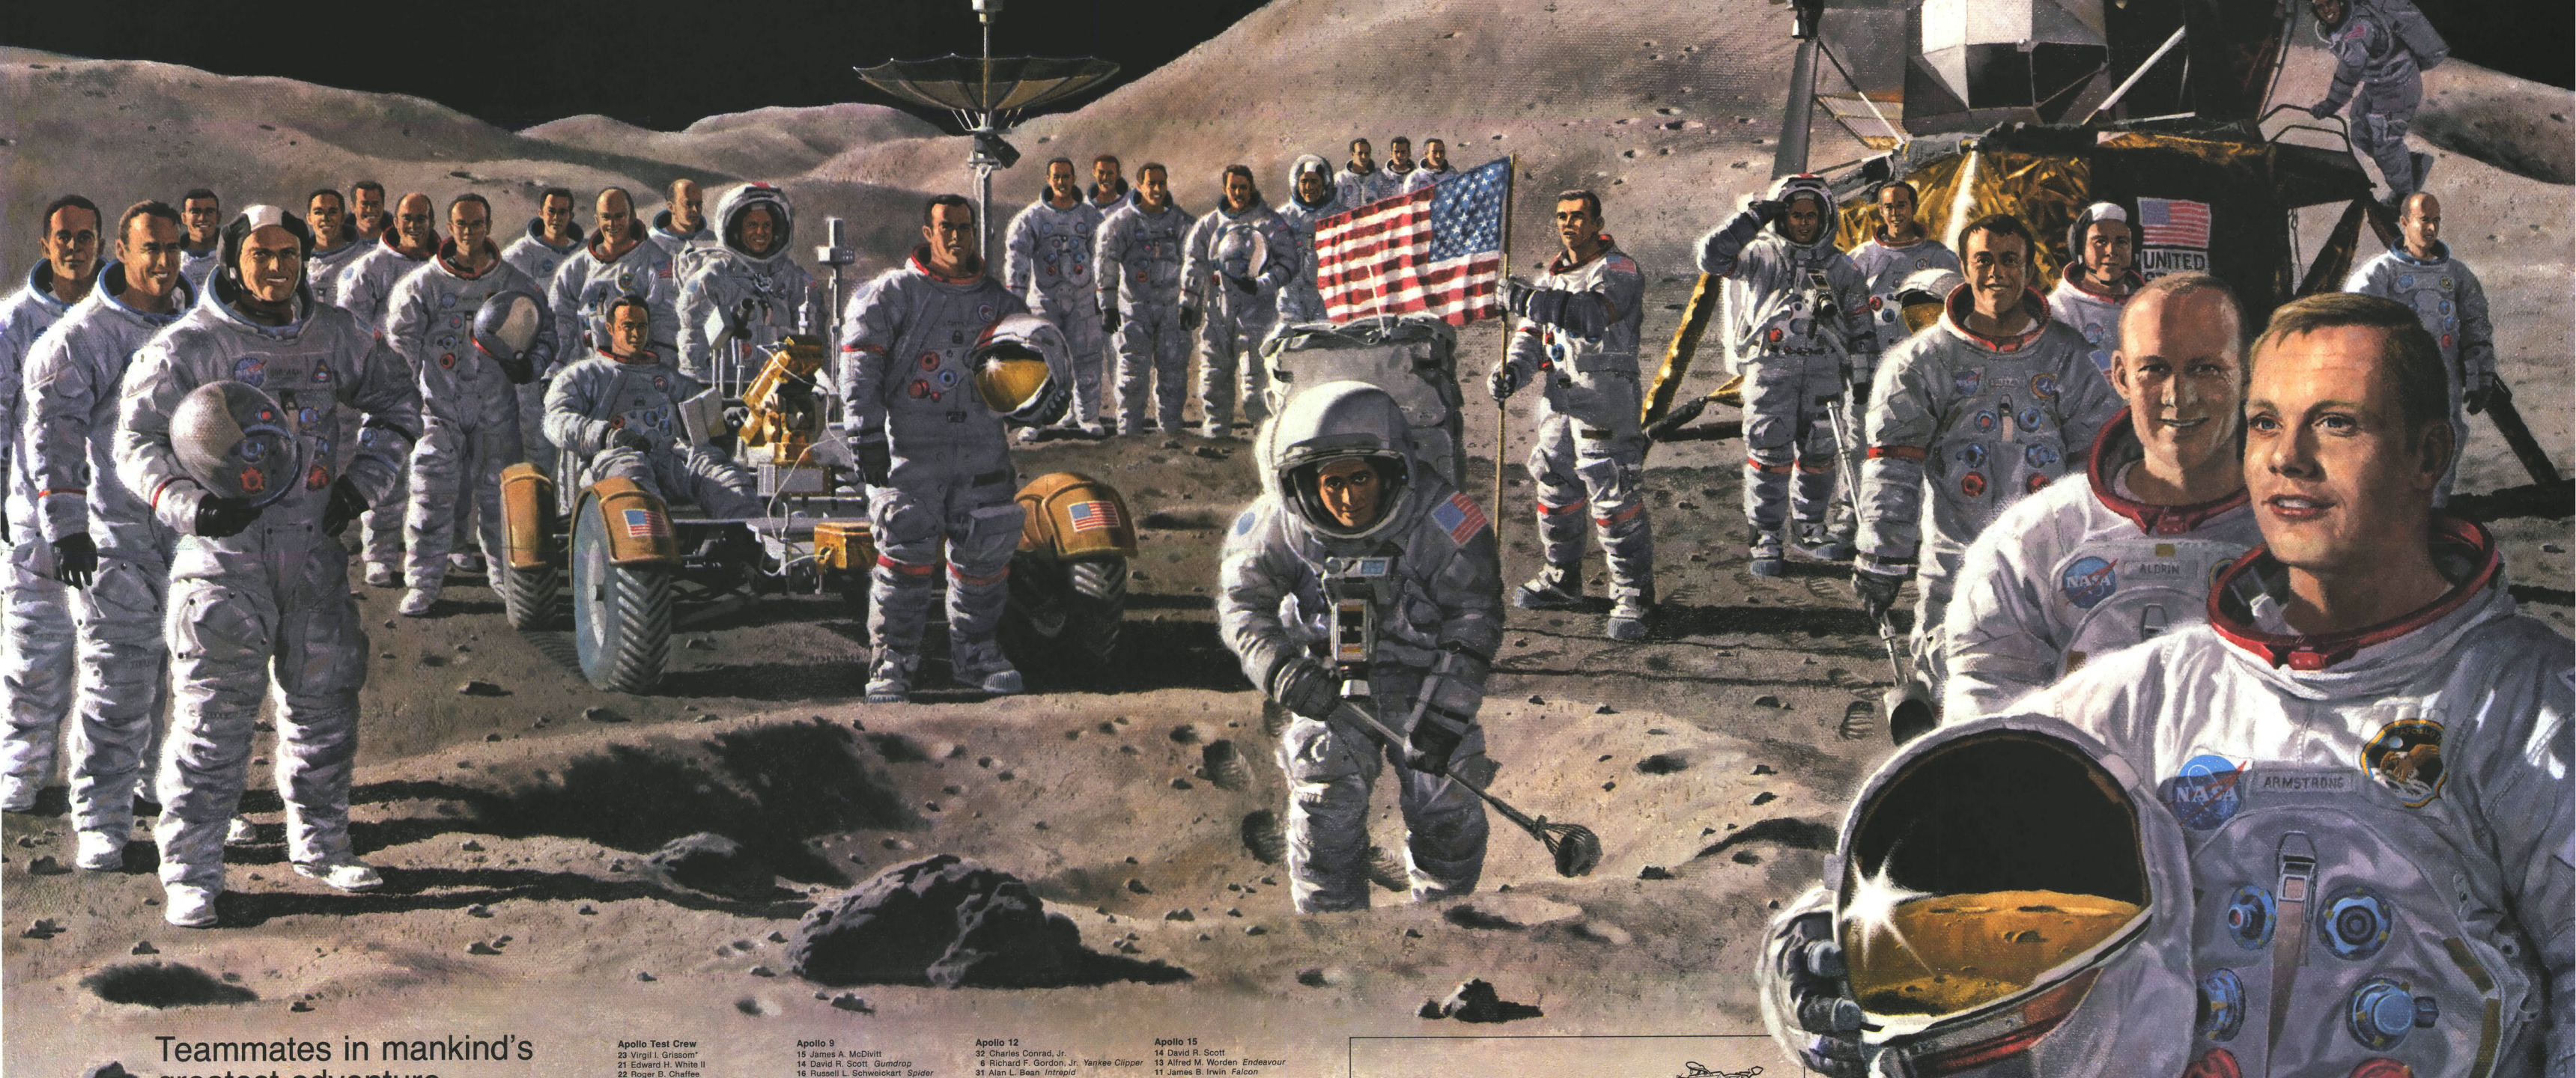 The astronauts on the moon